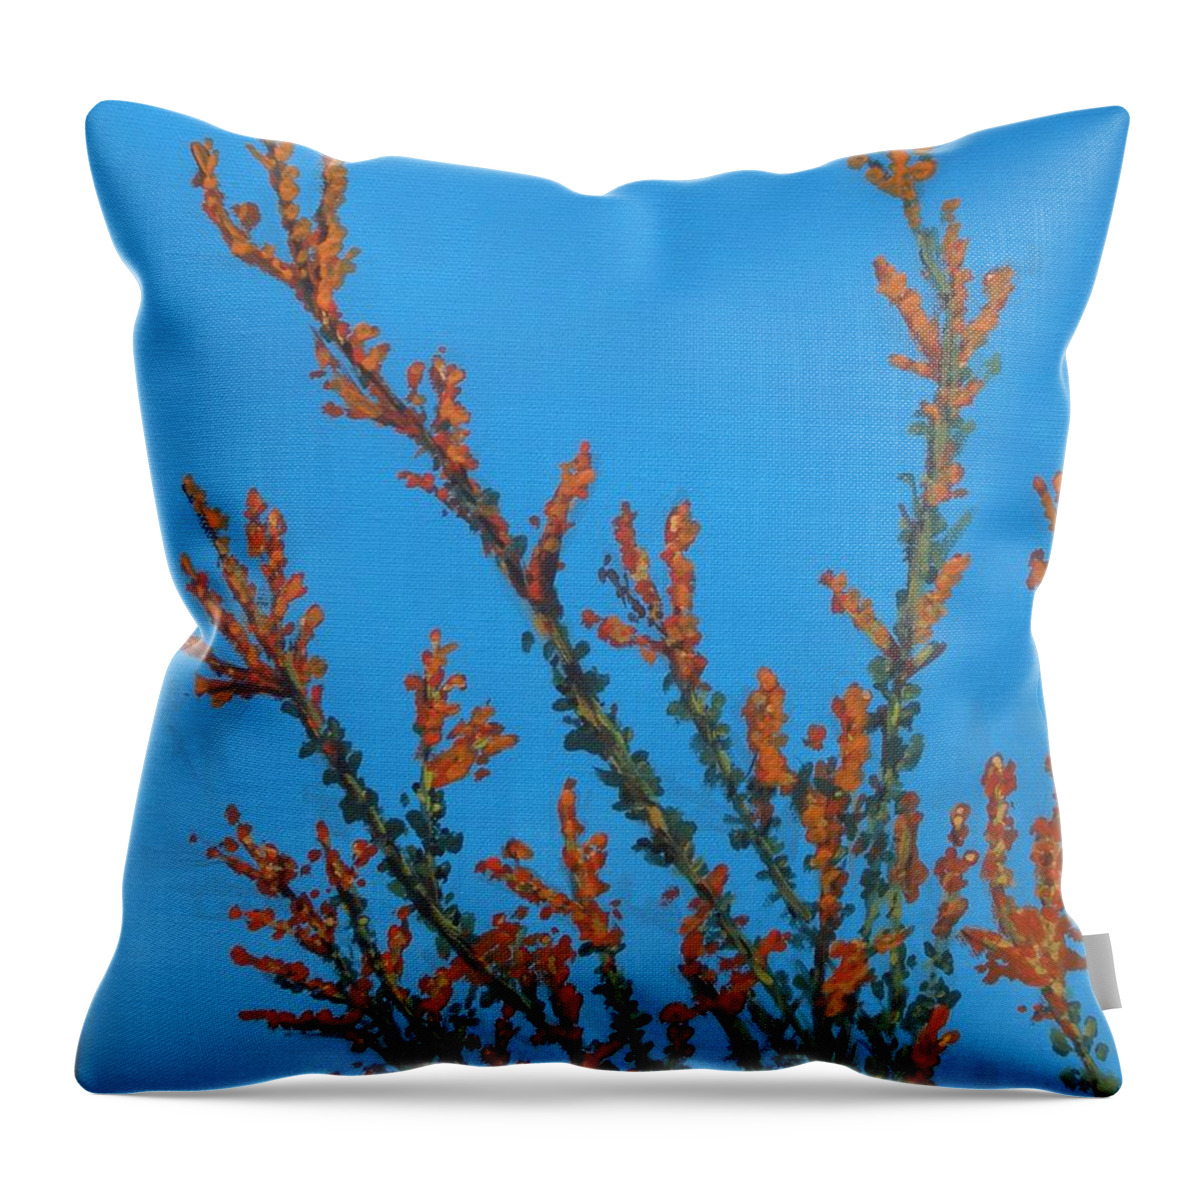 Floral Throw Pillow featuring the painting Ocotillo Cactus by Betty-Anne McDonald